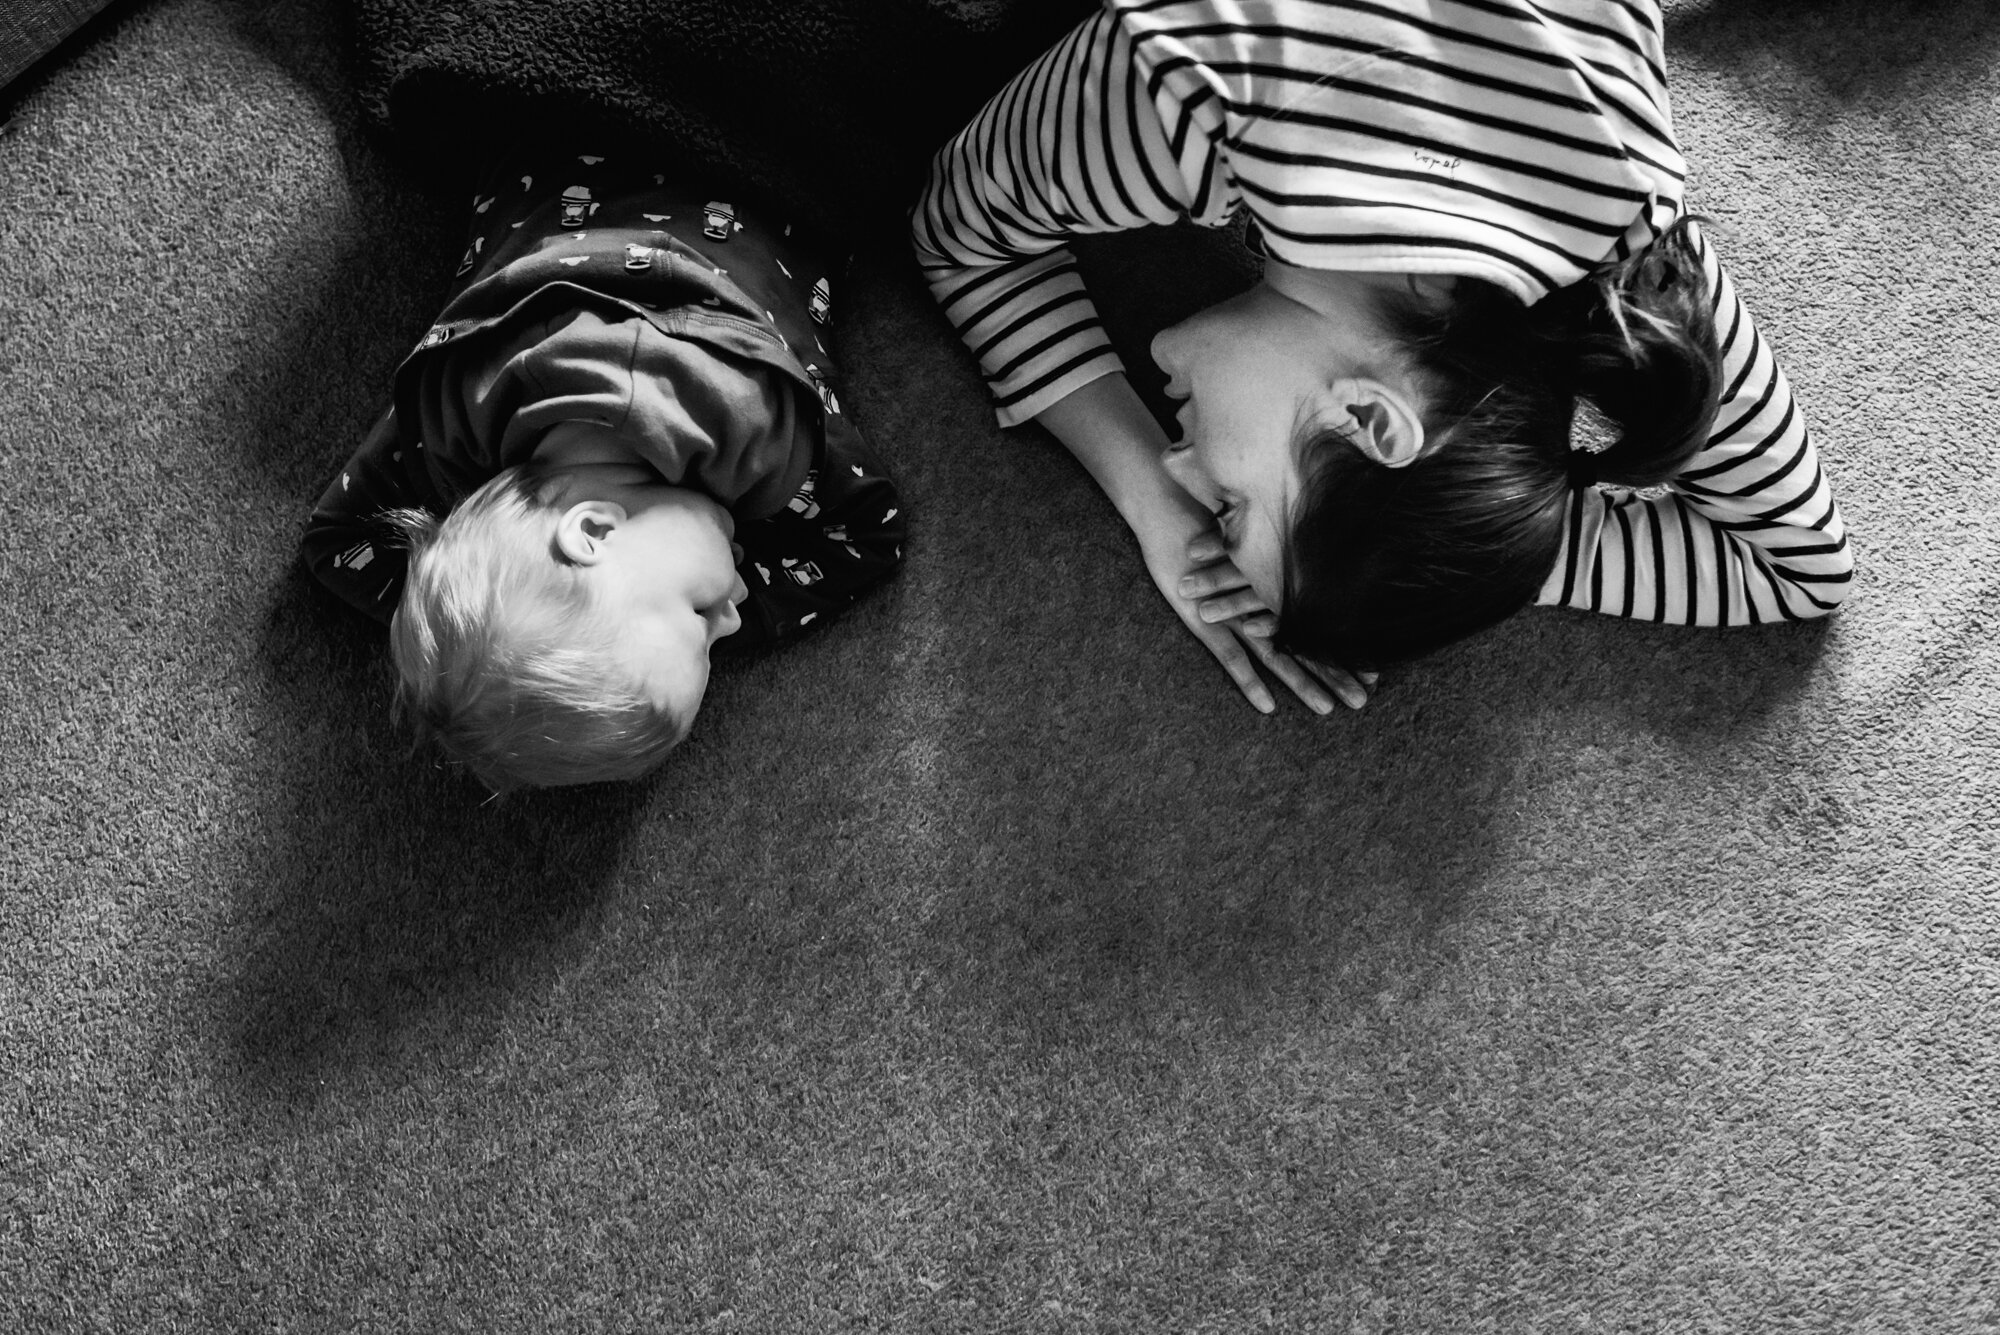  Black and white photo of a mother in a stripy top laying on the floor with her toddler son in a car cardigan. Both have their faces facing each other. 